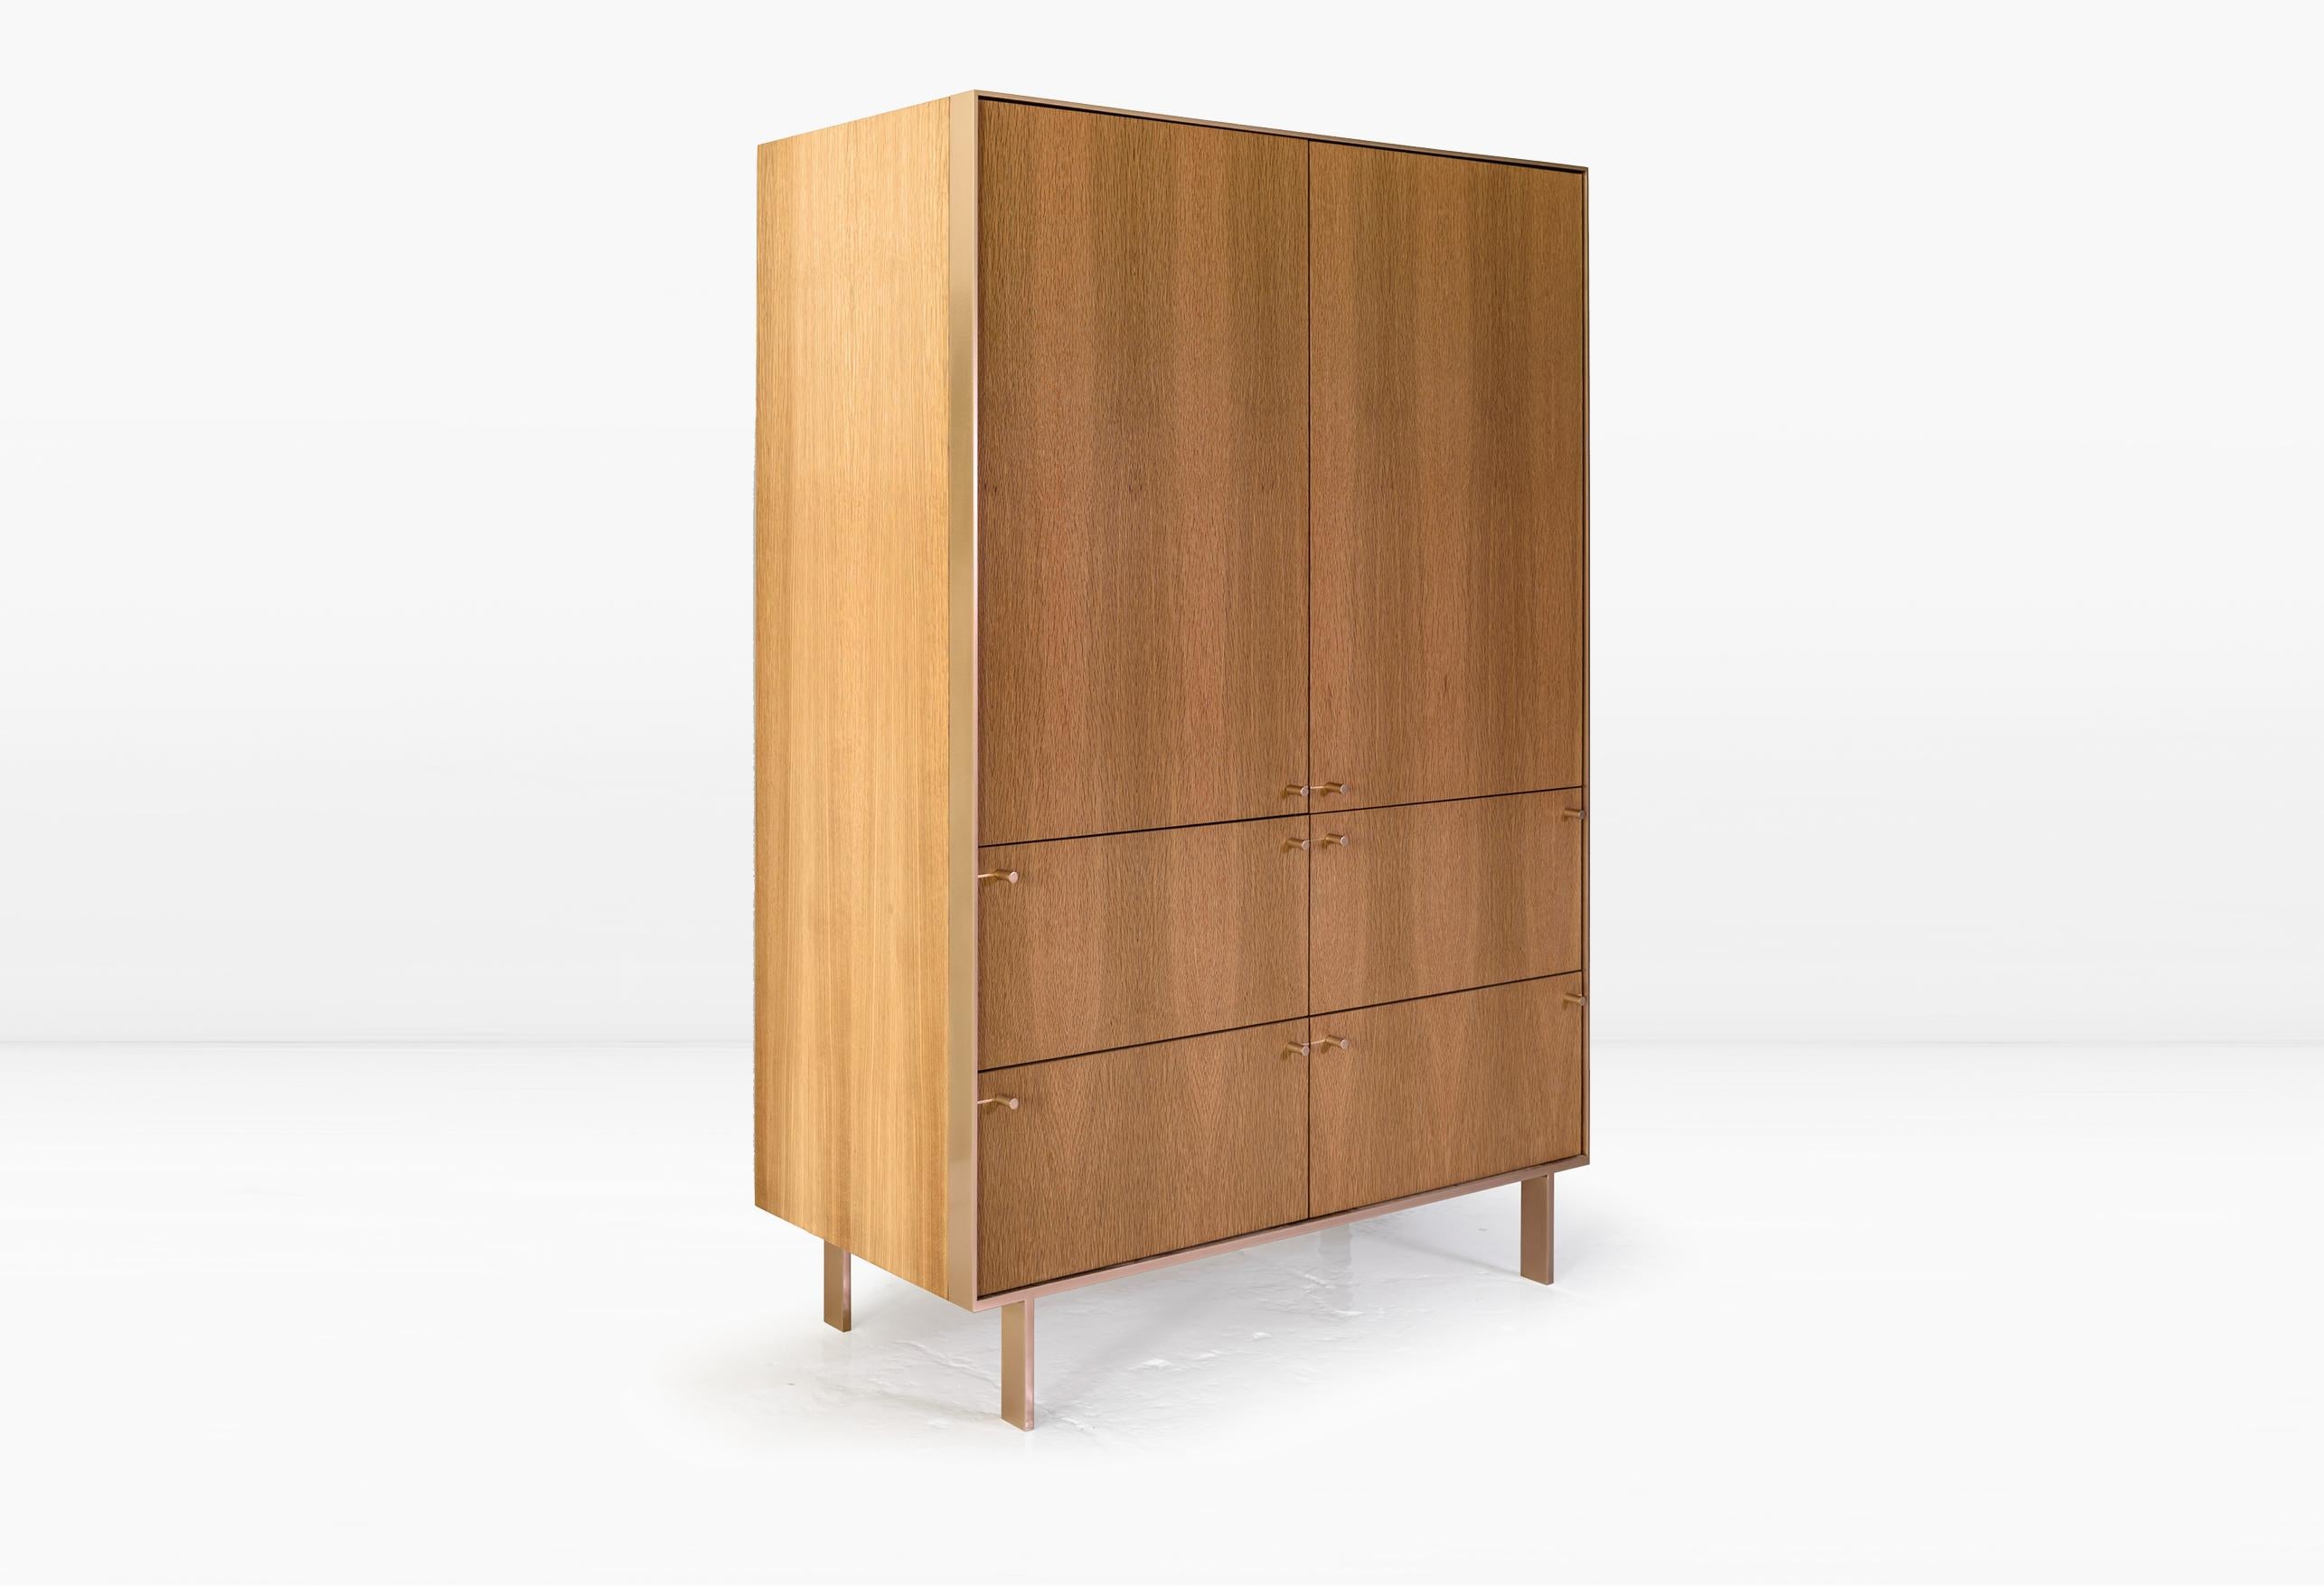 The quarter inch thick, metal strap which frames the Ingemar Cabinet, transforms into legs at the base while seamlessly marrying to the wood cabinet behind it. The back face of the unit’s interior is clad in optional black mirror and the adjustable